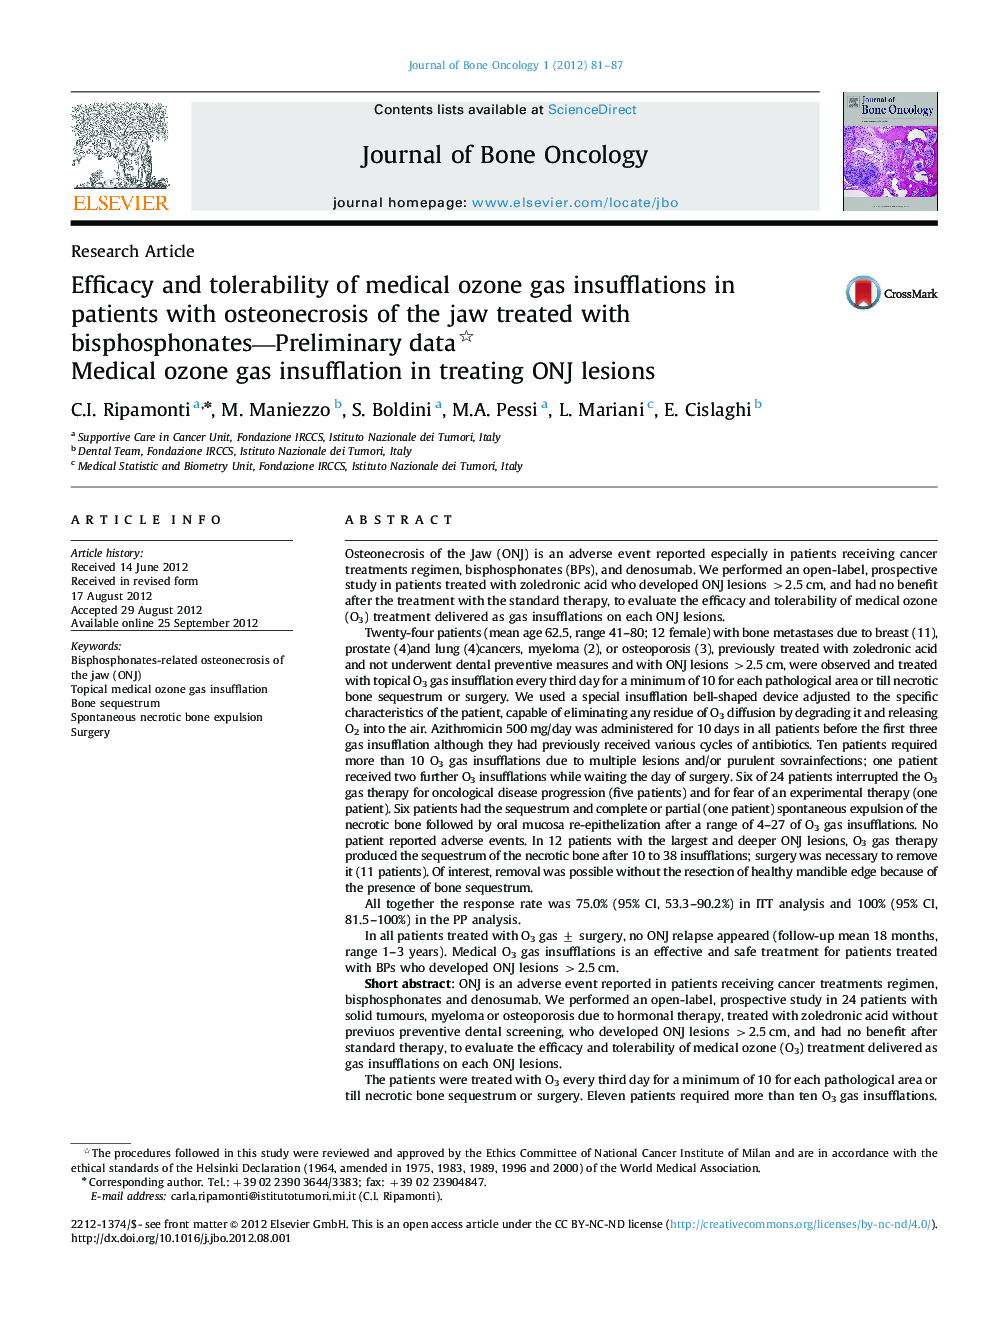 Efficacy and tolerability of medical ozone gas insufflations in patients with osteonecrosis of the jaw treated with bisphosphonates—Preliminary data : Medical ozone gas insufflation in treating ONJ lesions